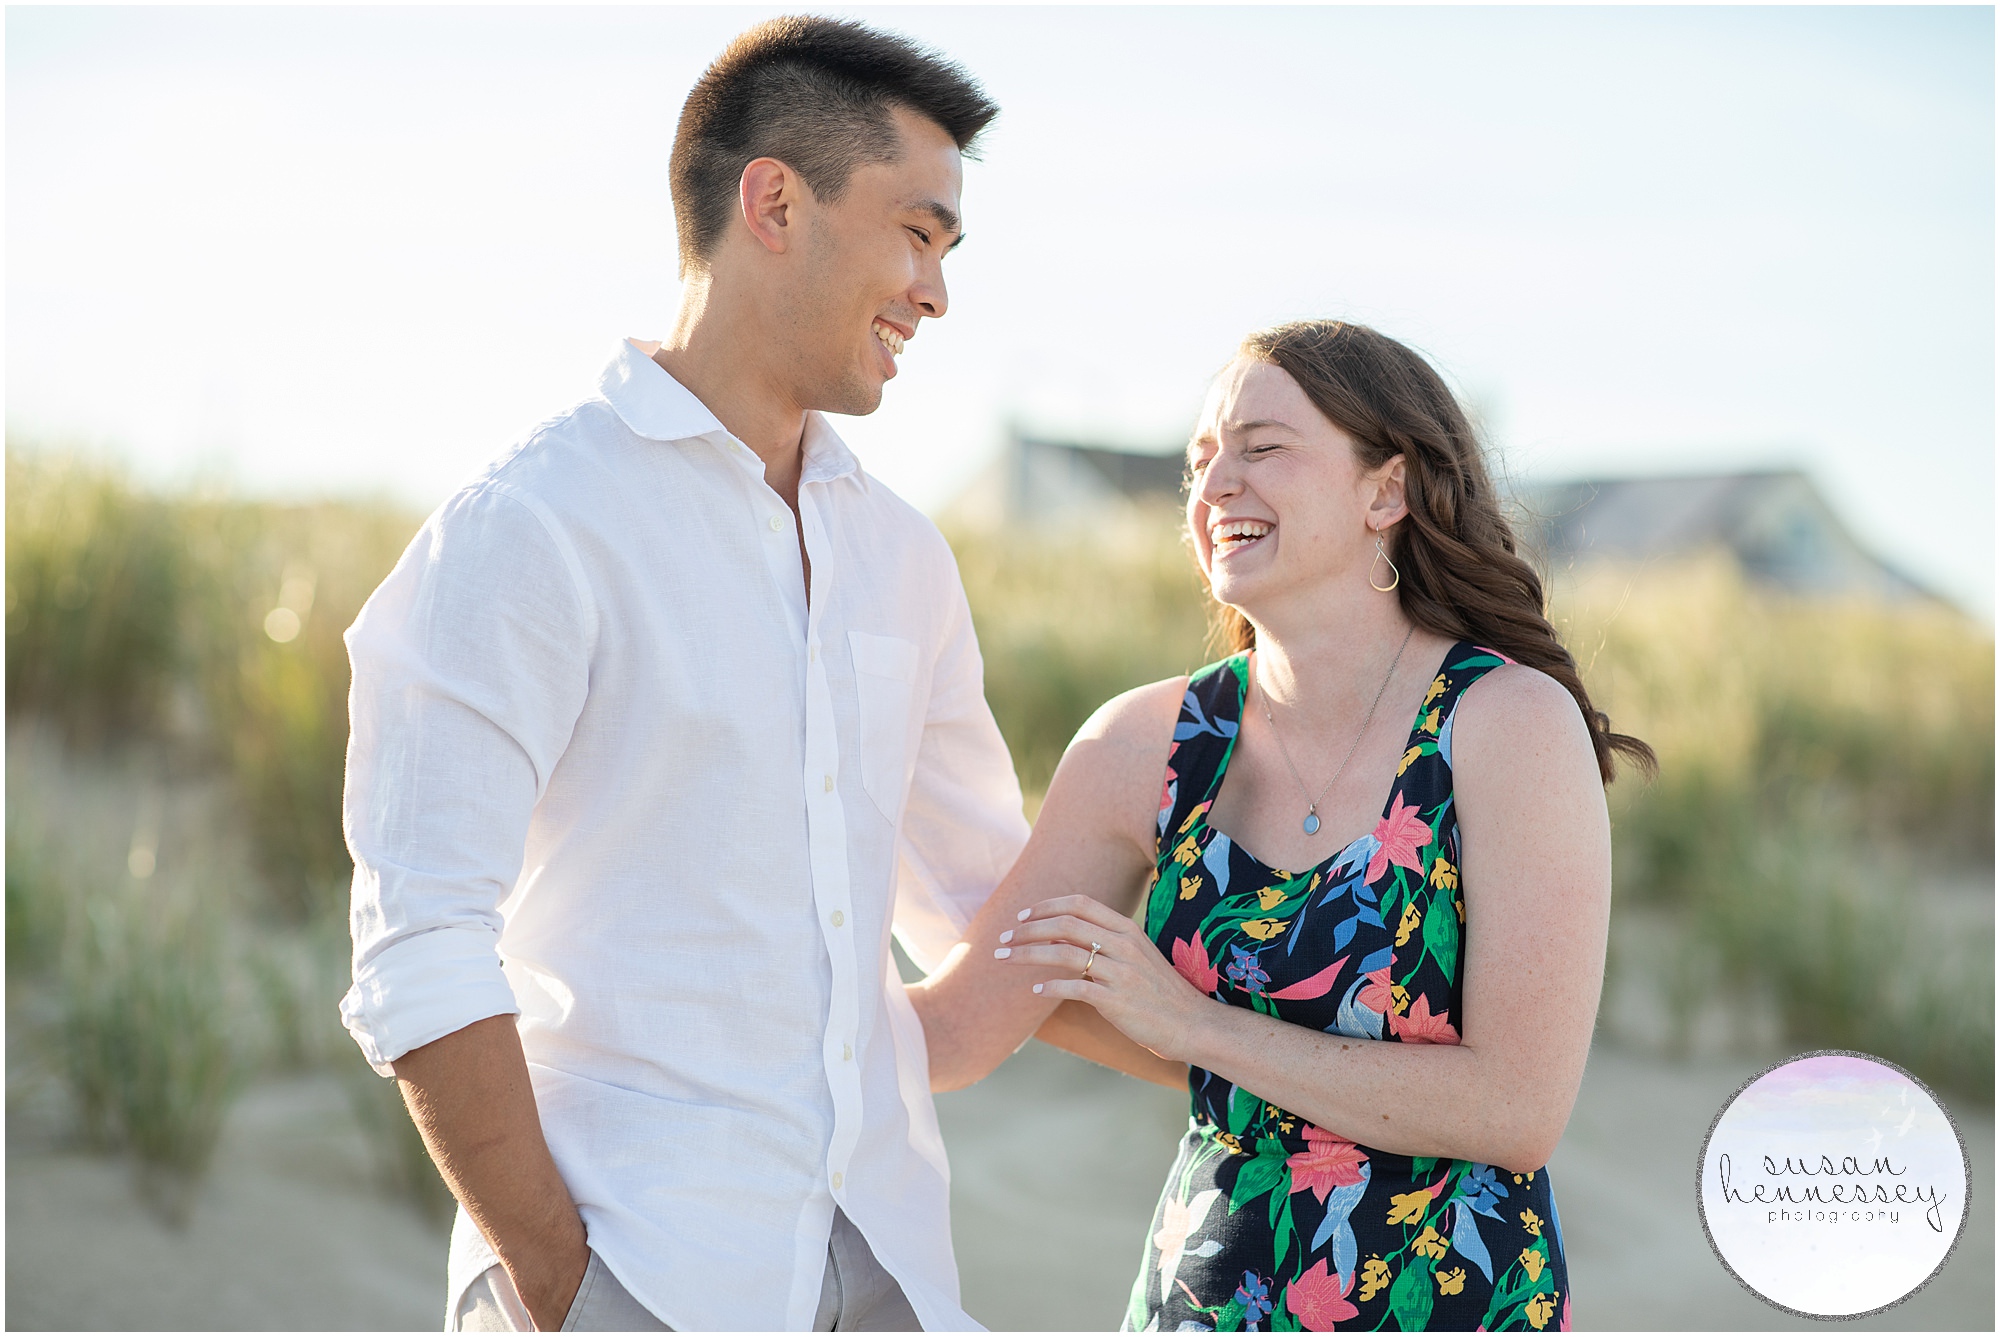 A coupe laugh at their Bradley Beach Engagement Session